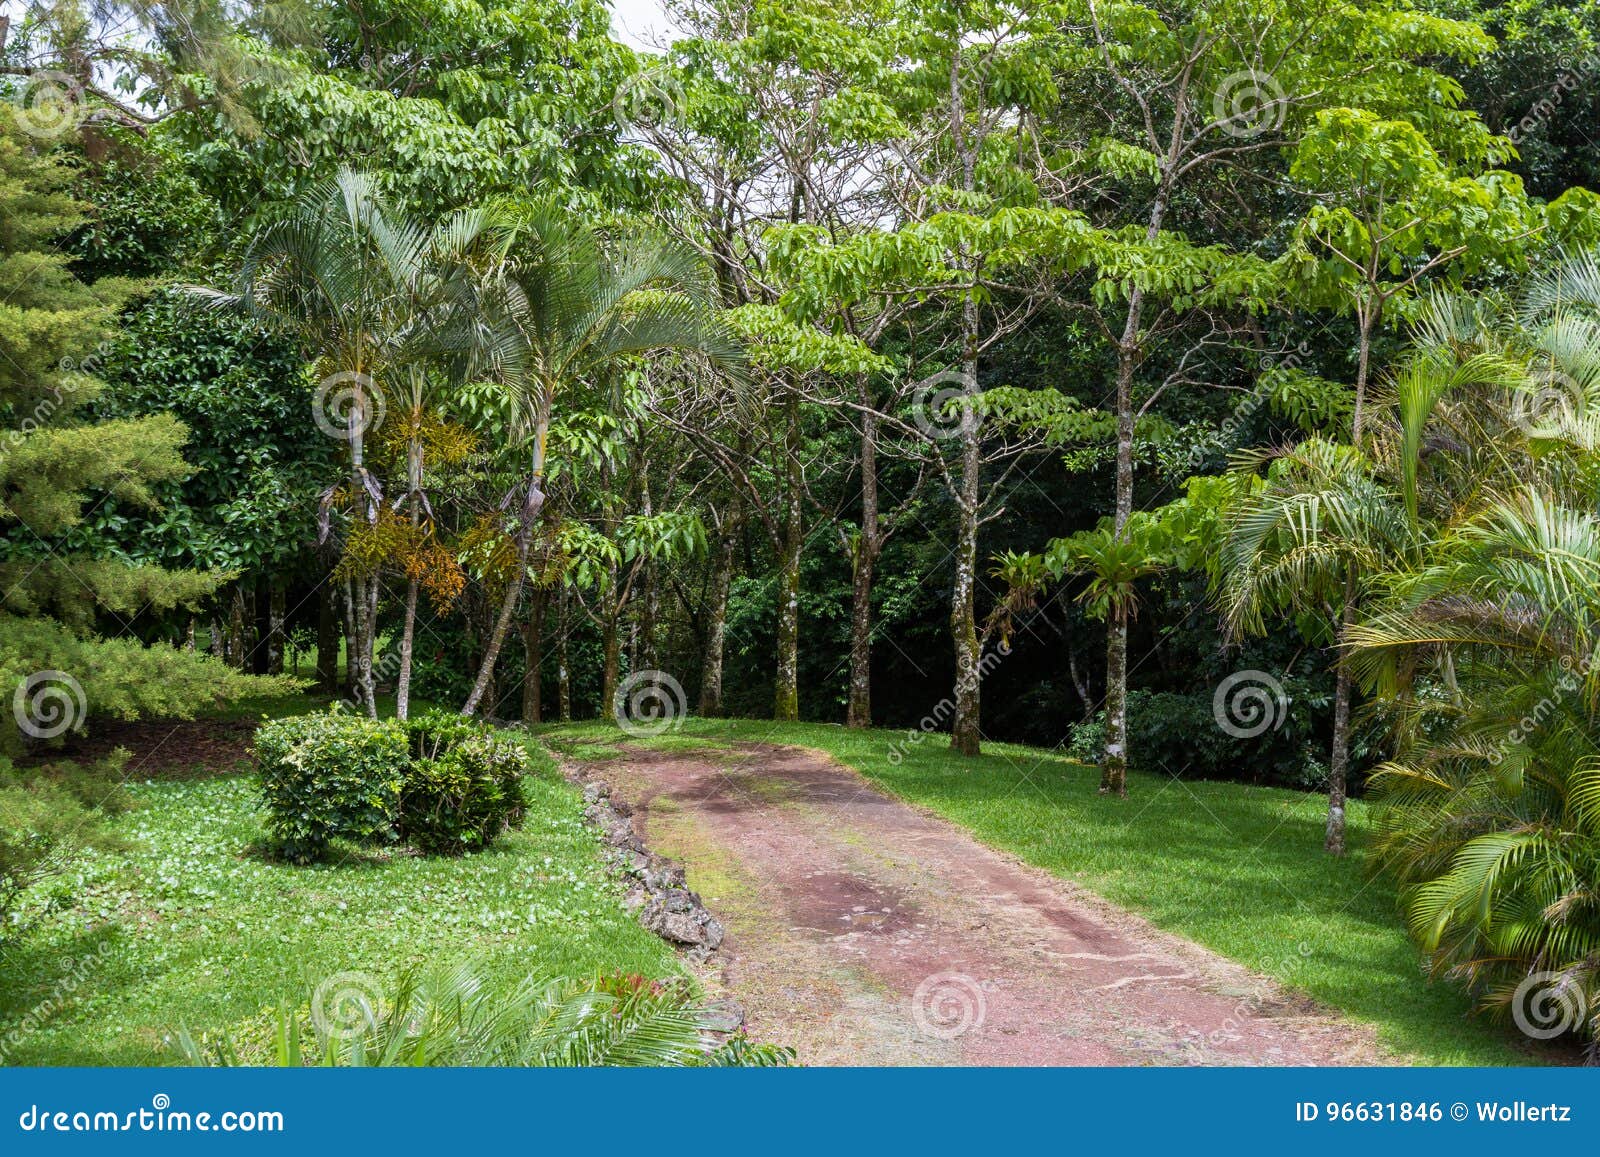 Tropical Driveway in Costa Rica Stock Photo - Image of jungle ...